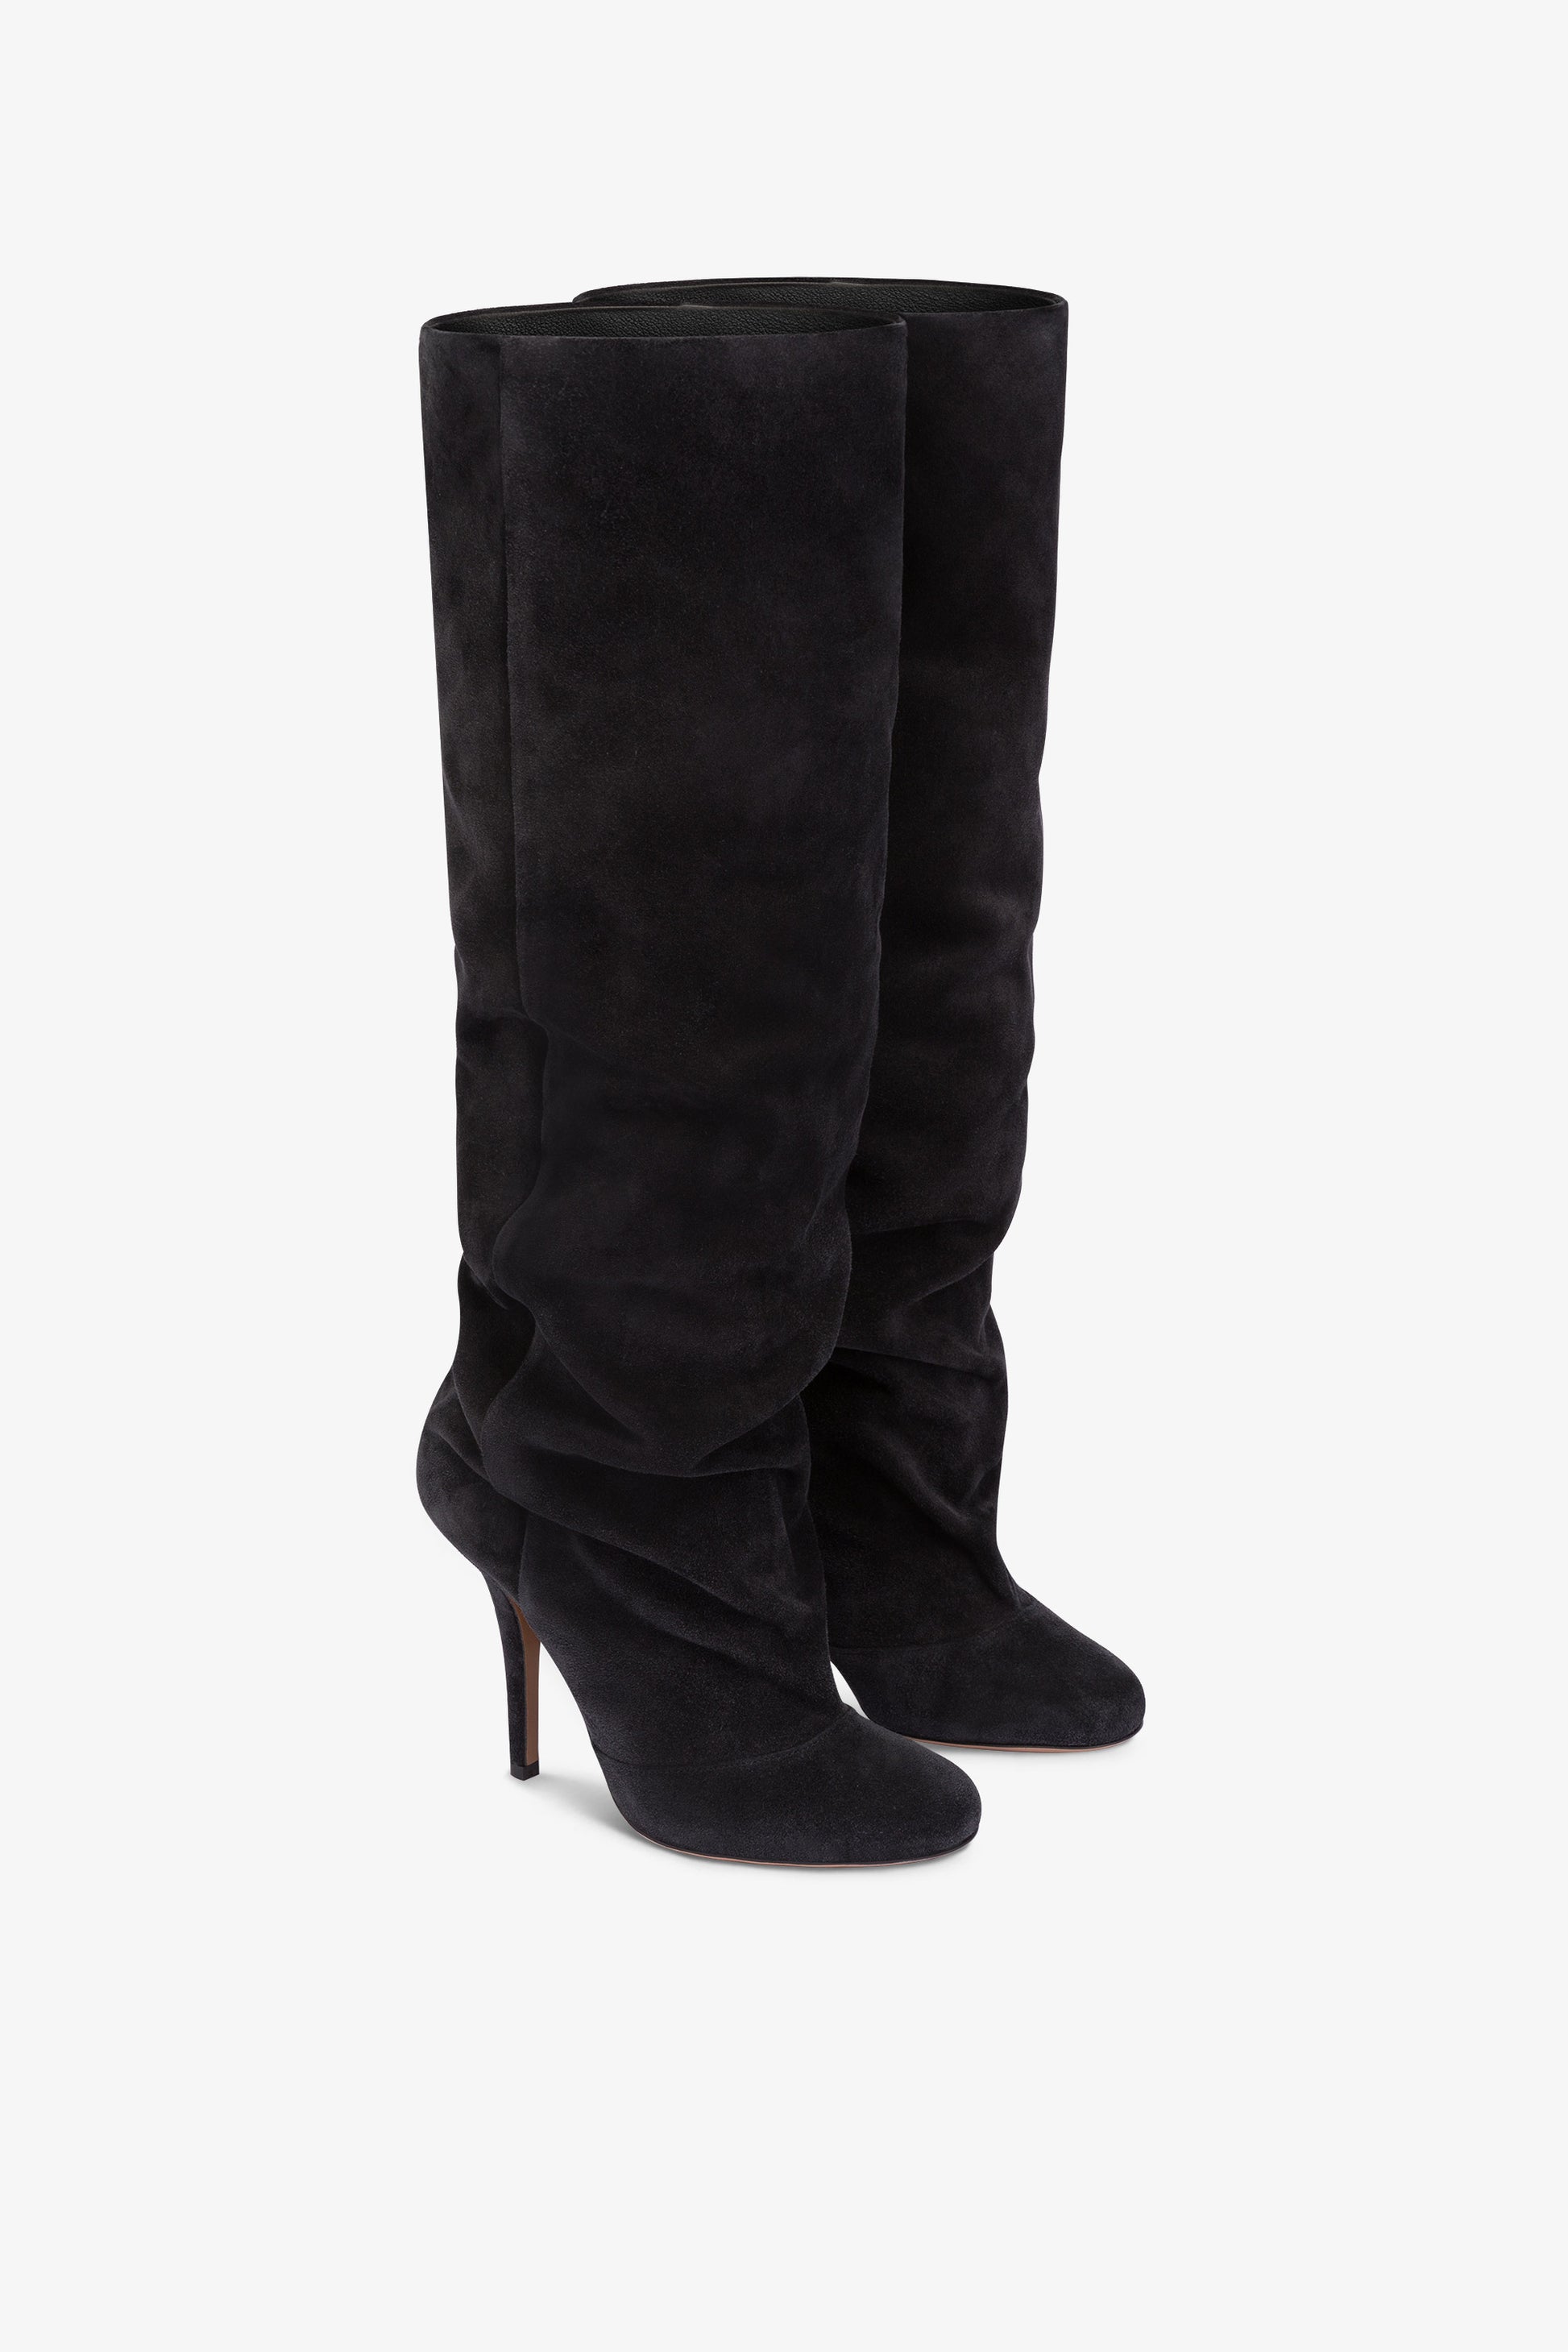 Knee-high boots in soft off-black suede leather